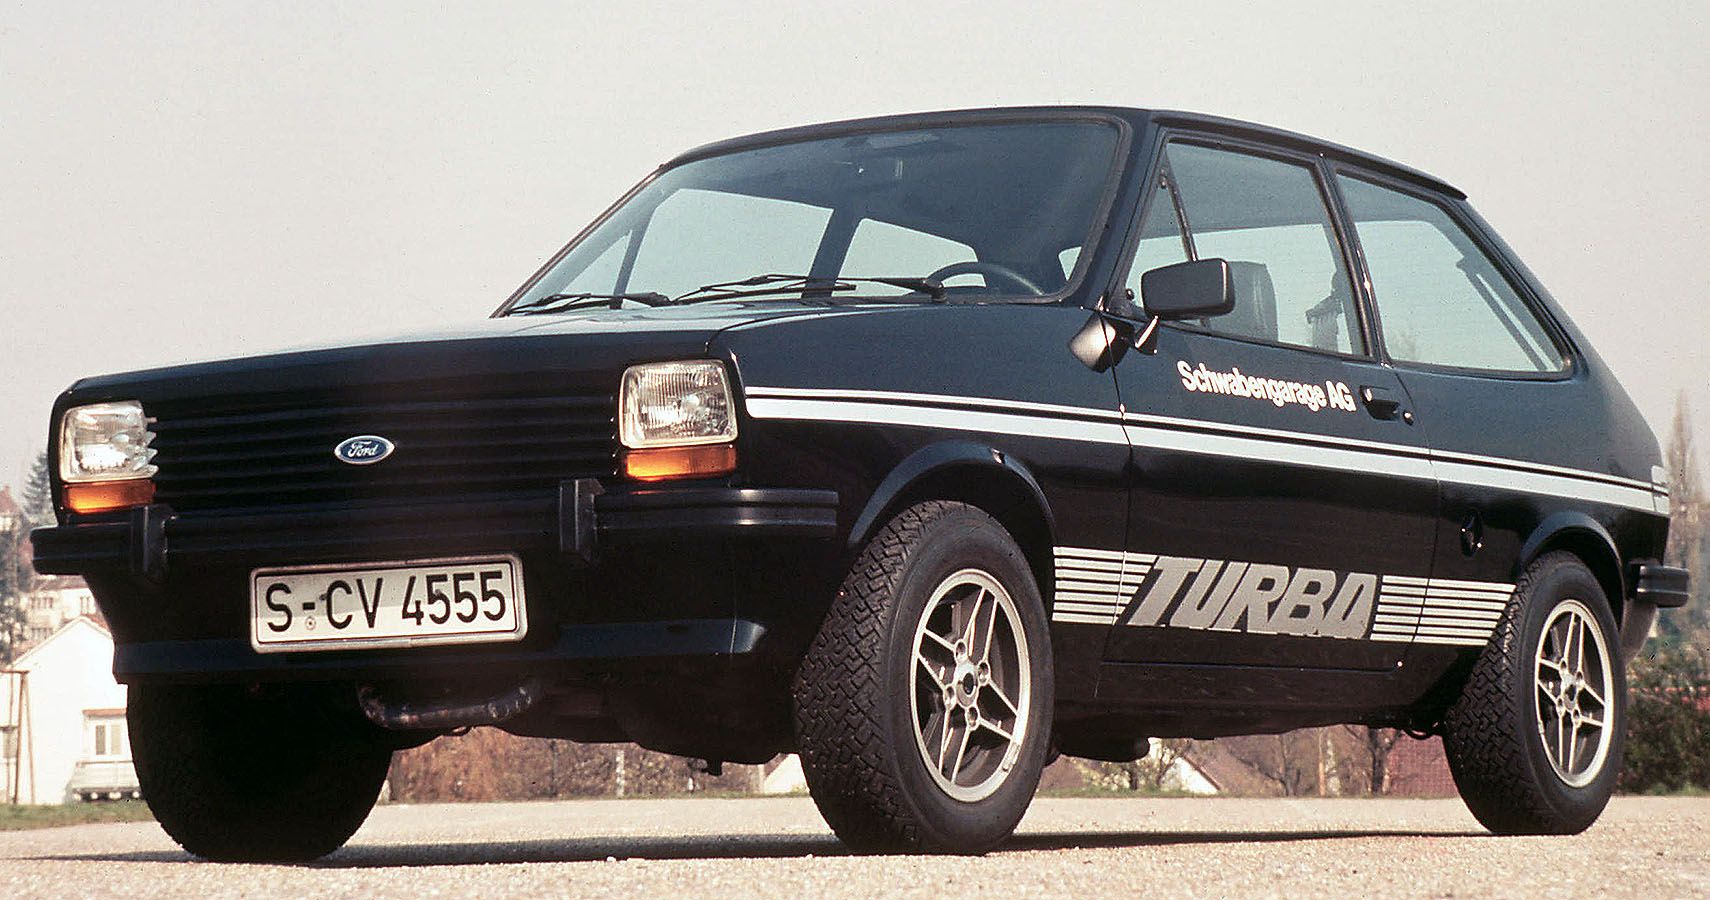 UK’s Star Performer: The Ford Fiesta (1976-Present)